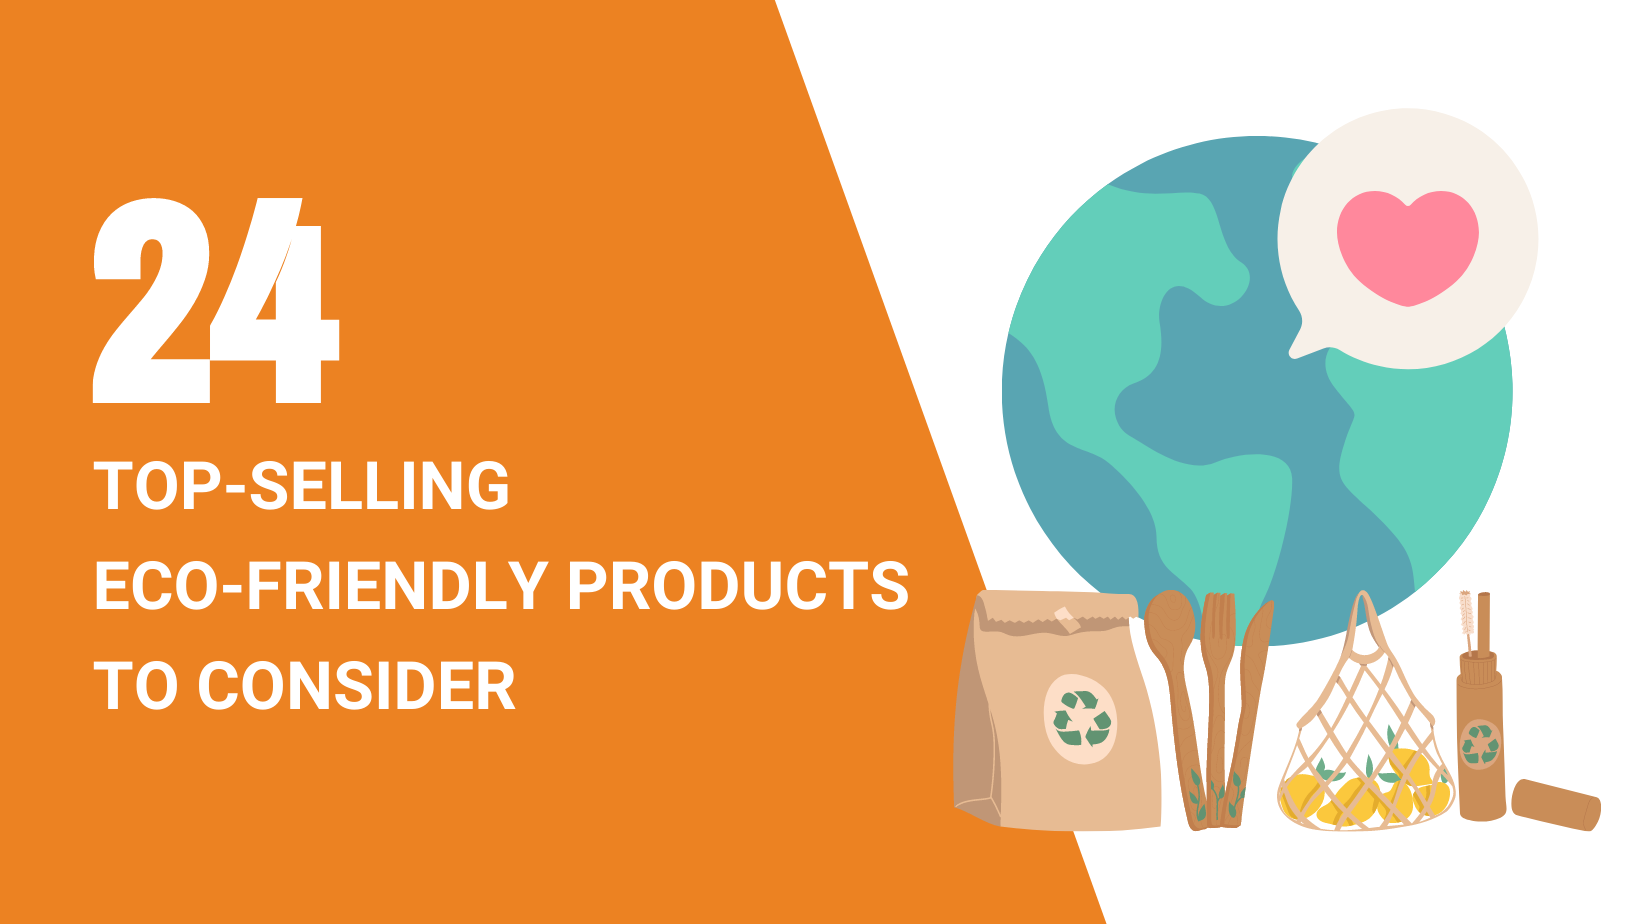 24 TOP-SELLING ECO-FRIENDLY PRODUCTS TO CONSIDER